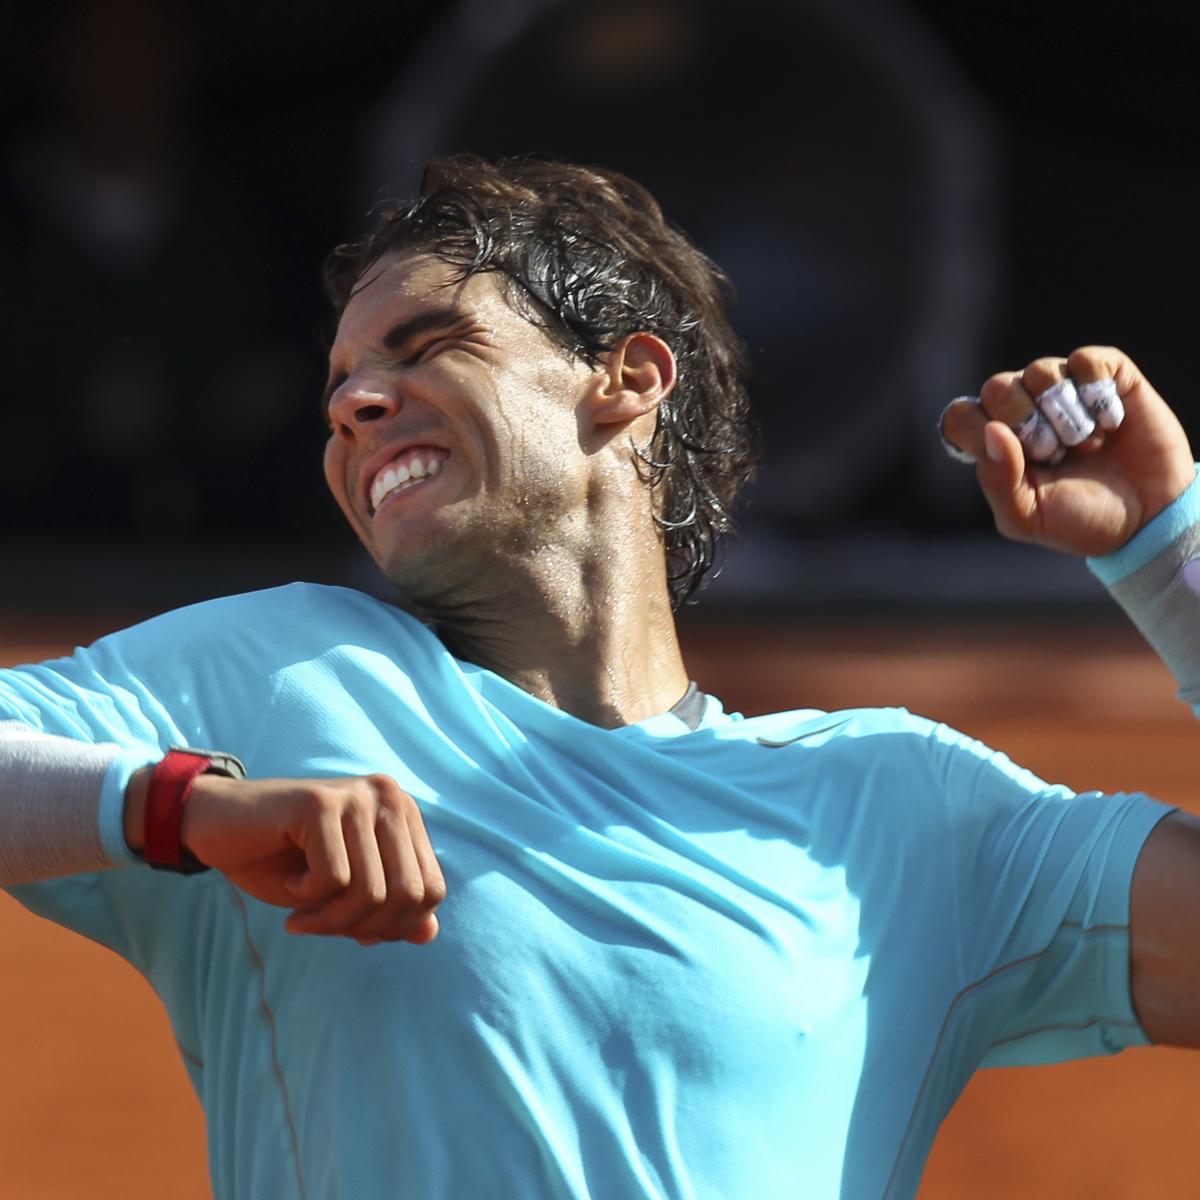 French Open 2014: Day 13 Results, Highlights and Scores Recap from